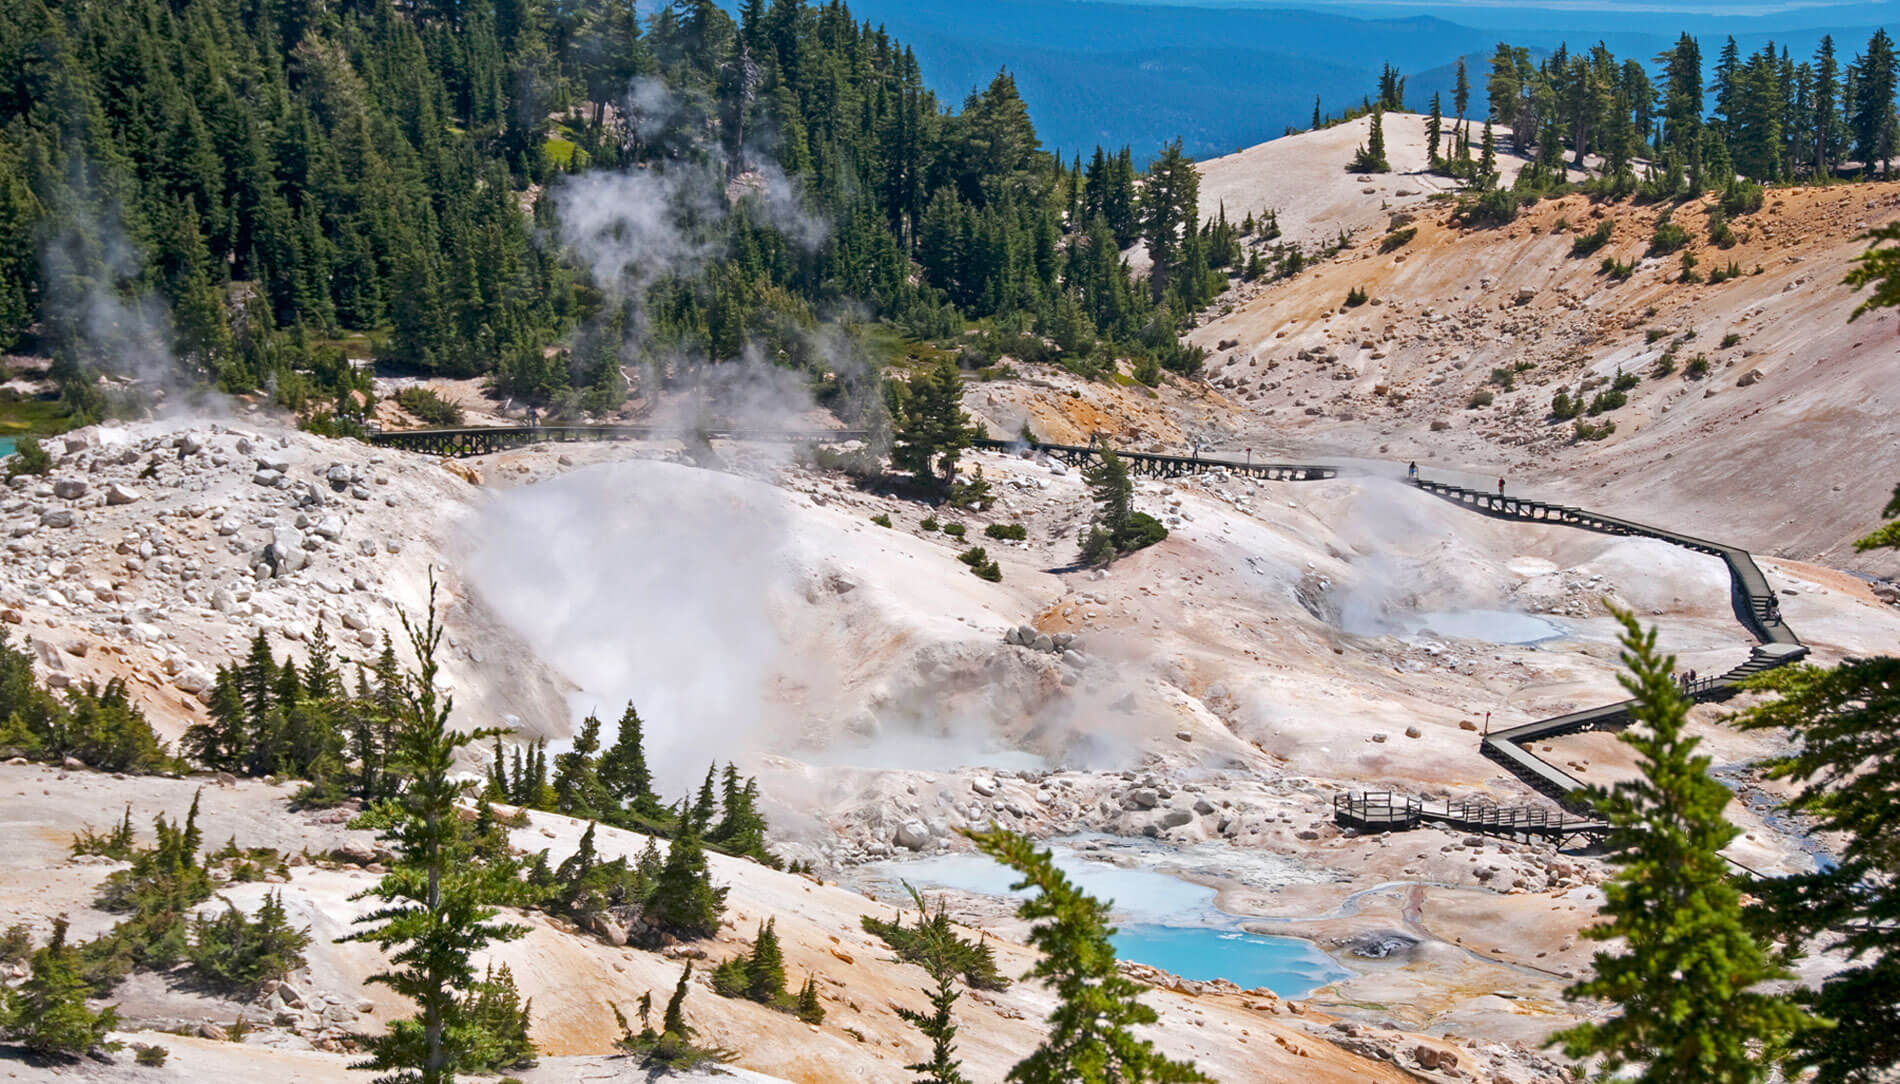 The Bumpass Hell hydrothermal area in Lassen Volcanic National Park